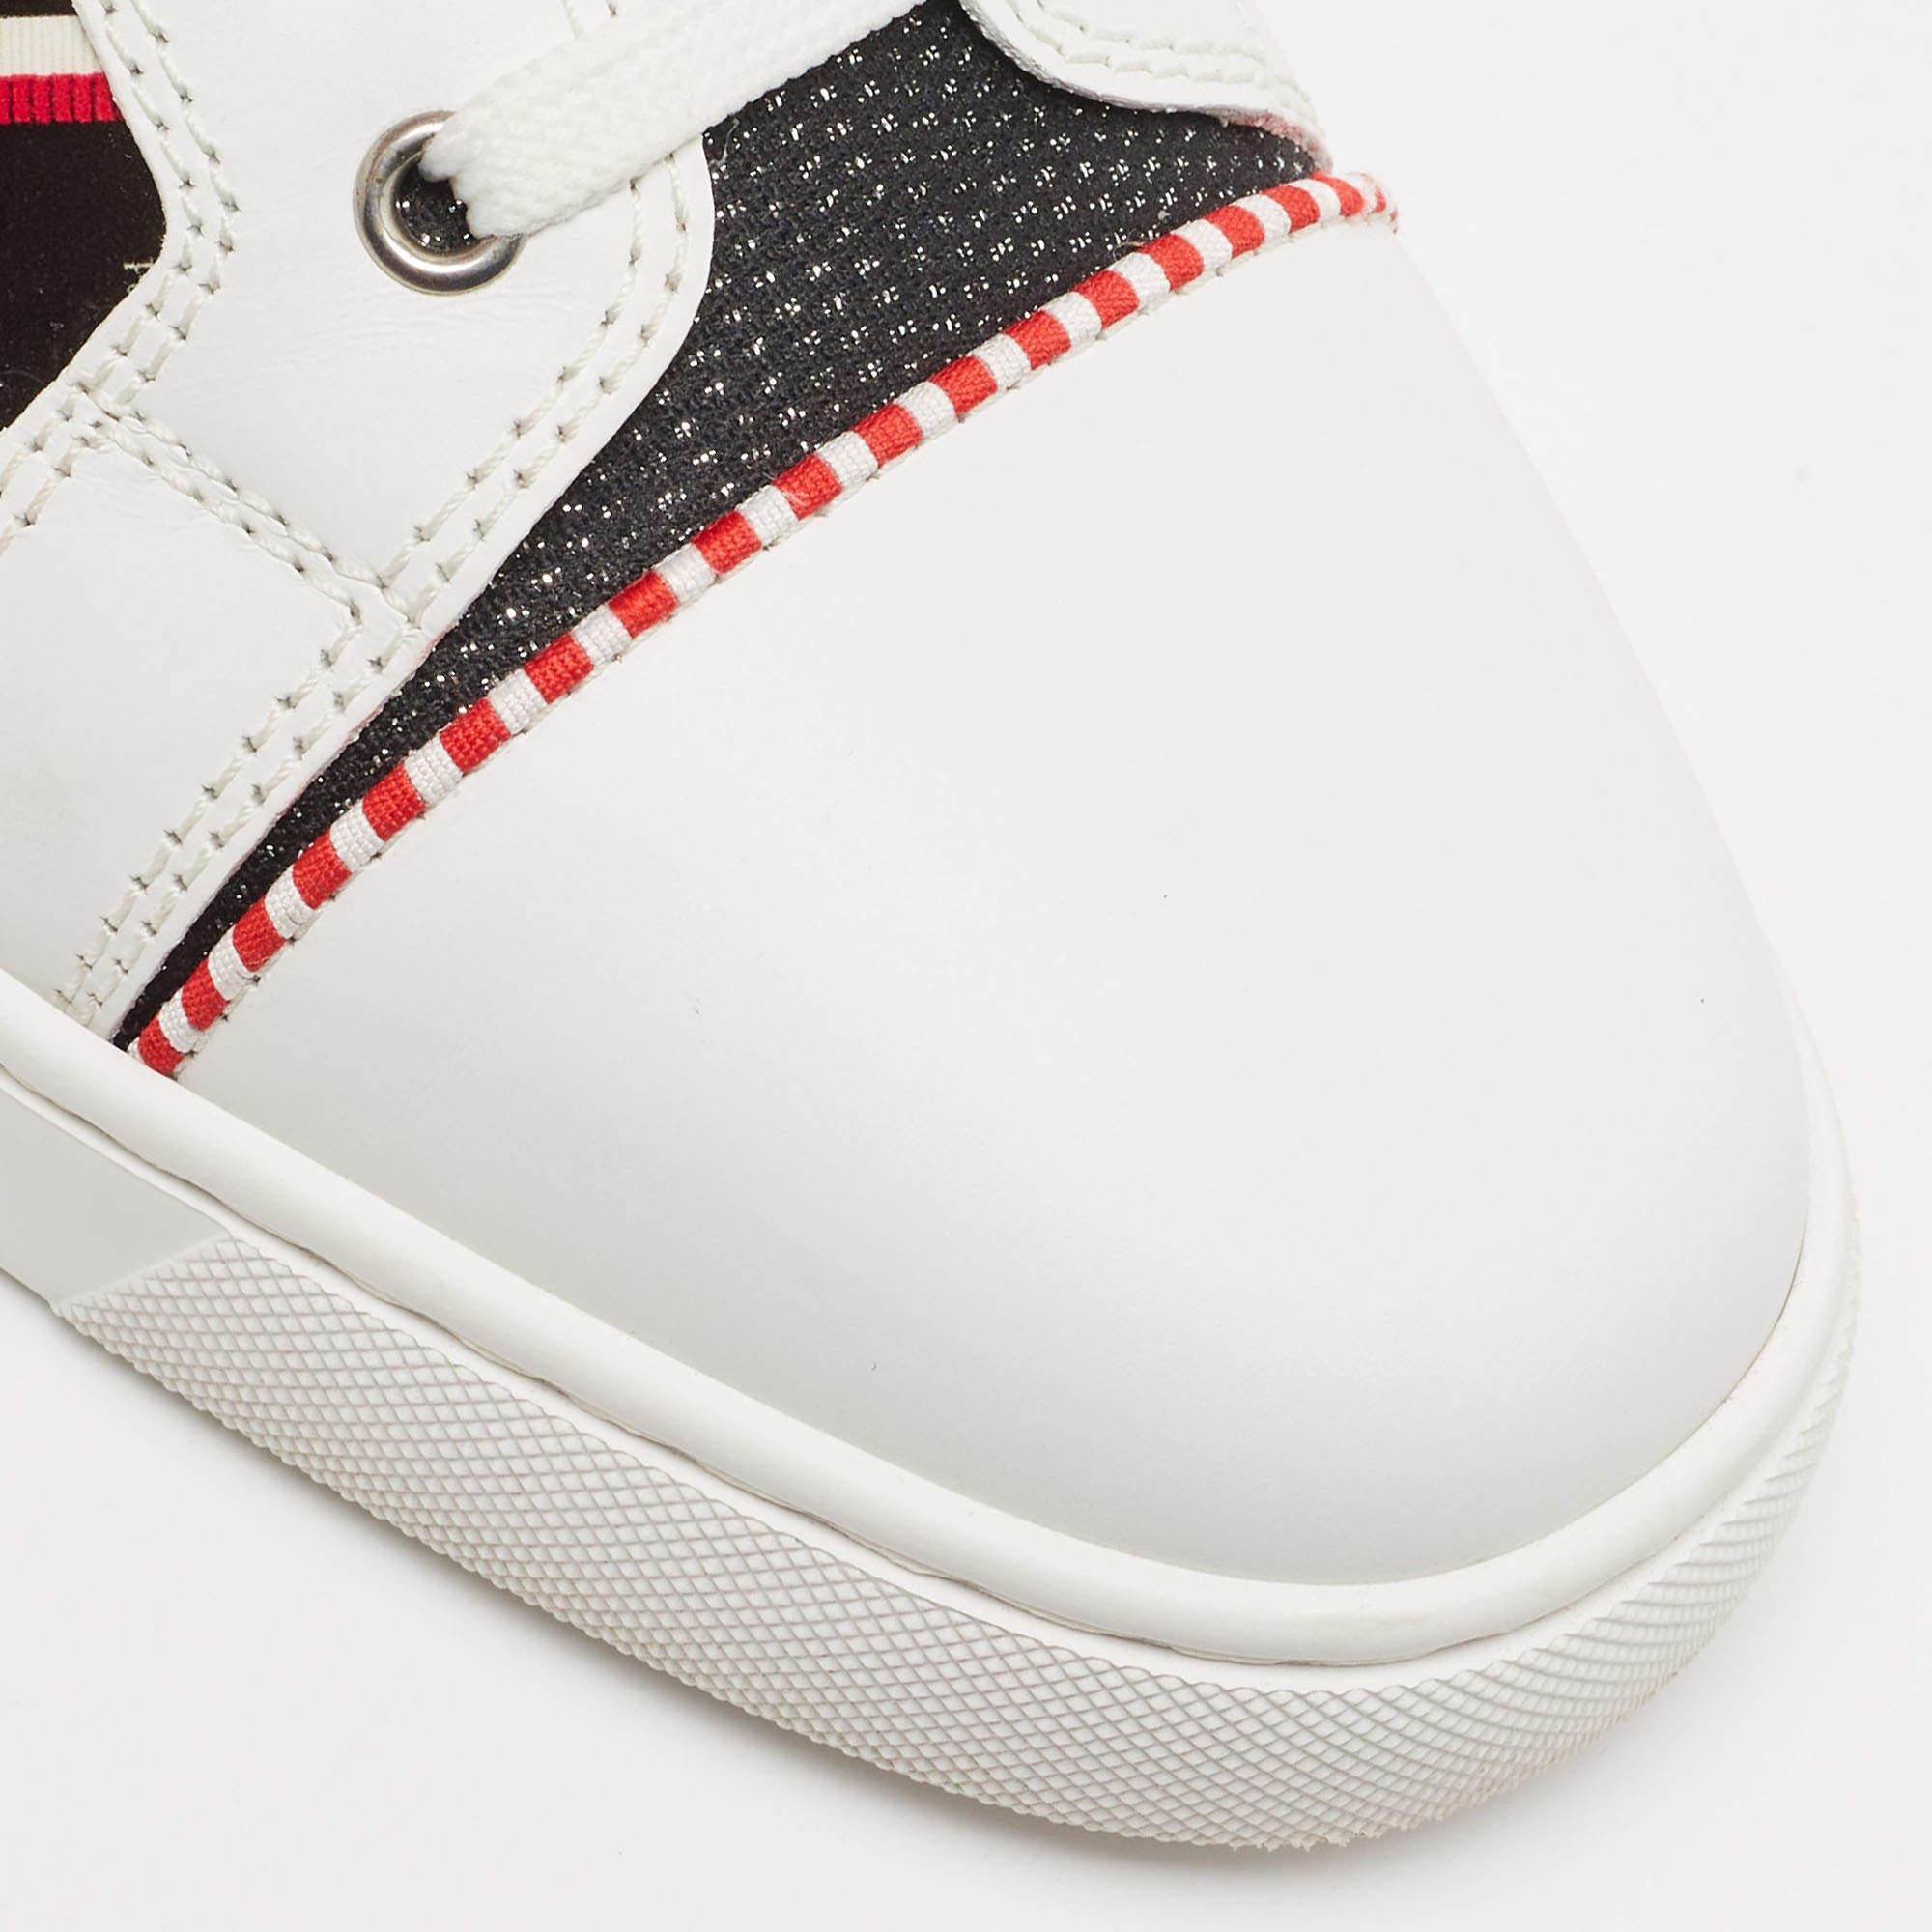 Christian Louboutin Printed Patent and Leather Orlato Sneakers Size 42.5 For Sale 2